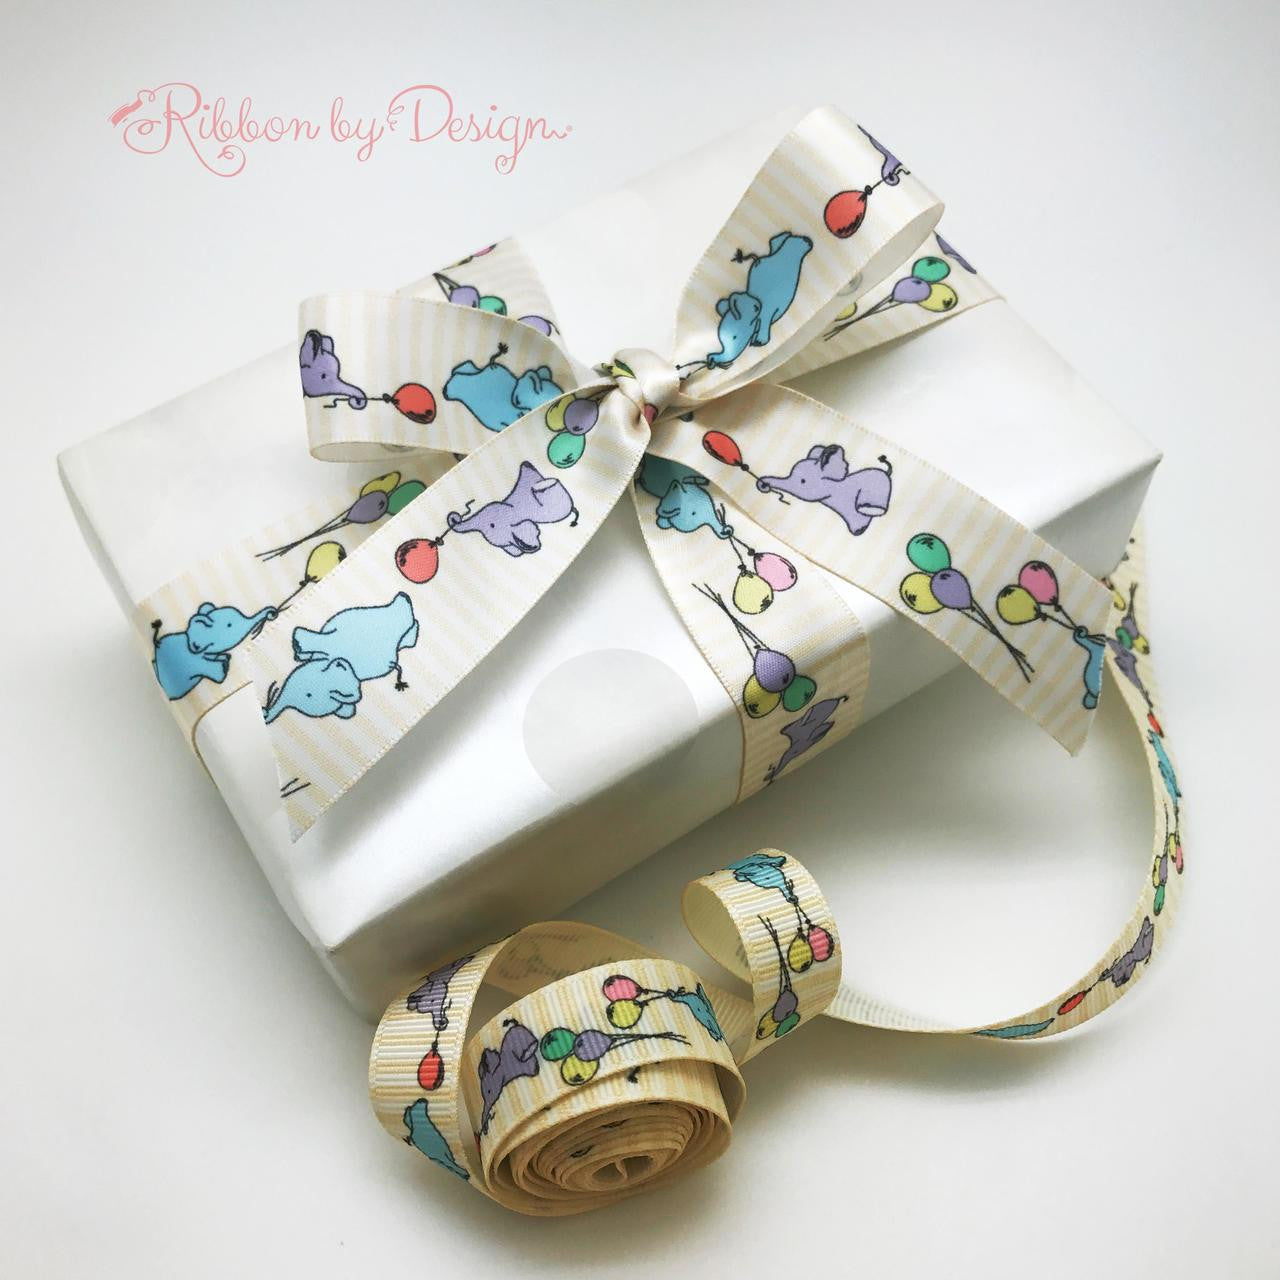 We loved these little baby elephants so much we printed them on satin and grosgrain! What a sweet presentation these cuties make on a baby gift or shower favor!